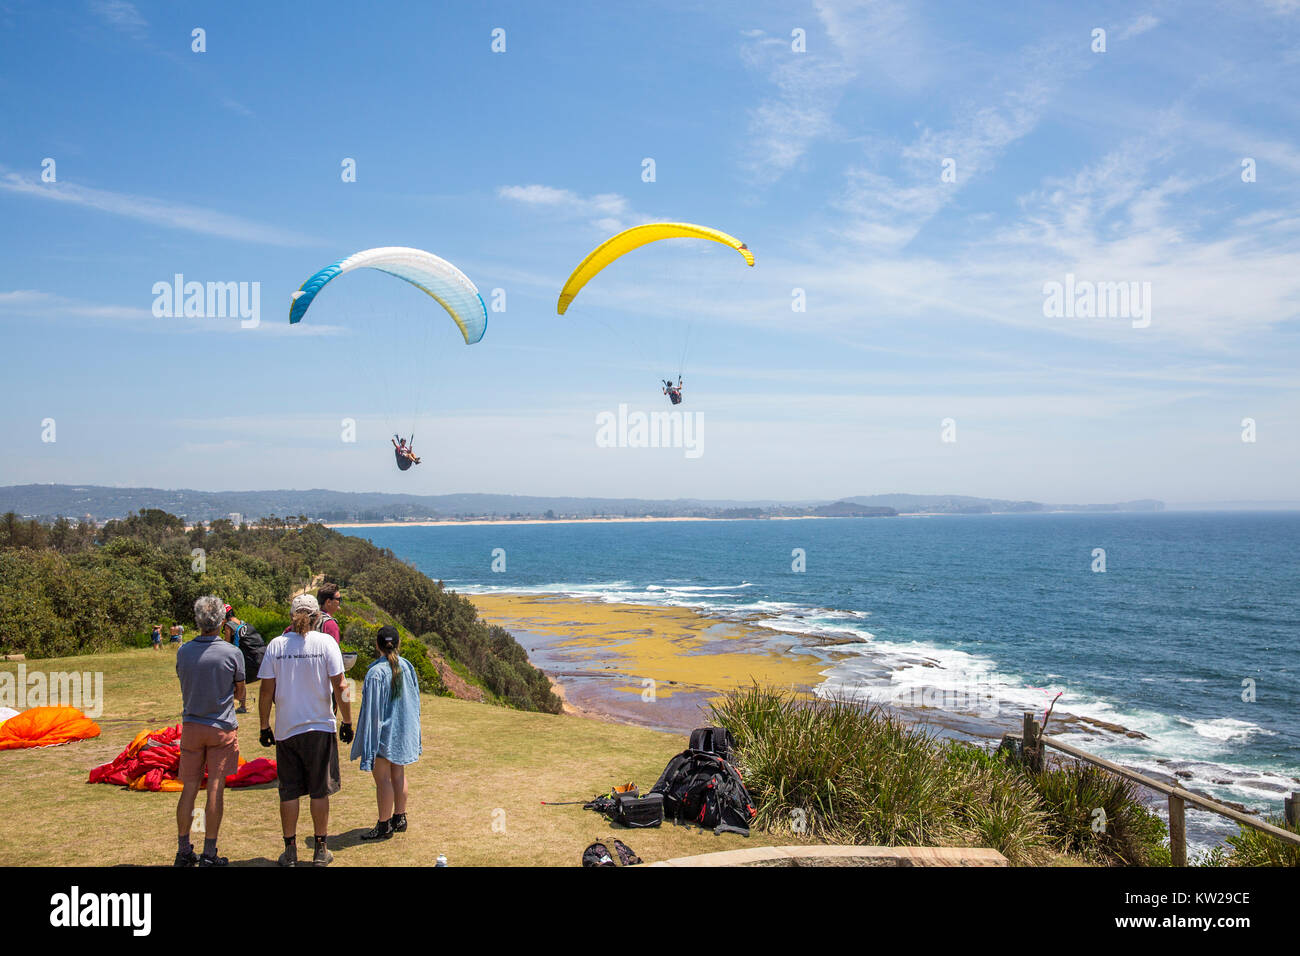 Paragliders enjoying the thermal currents at Long Reef Point on Sydney northern beaches,New South Wales,Australia Stock Photo